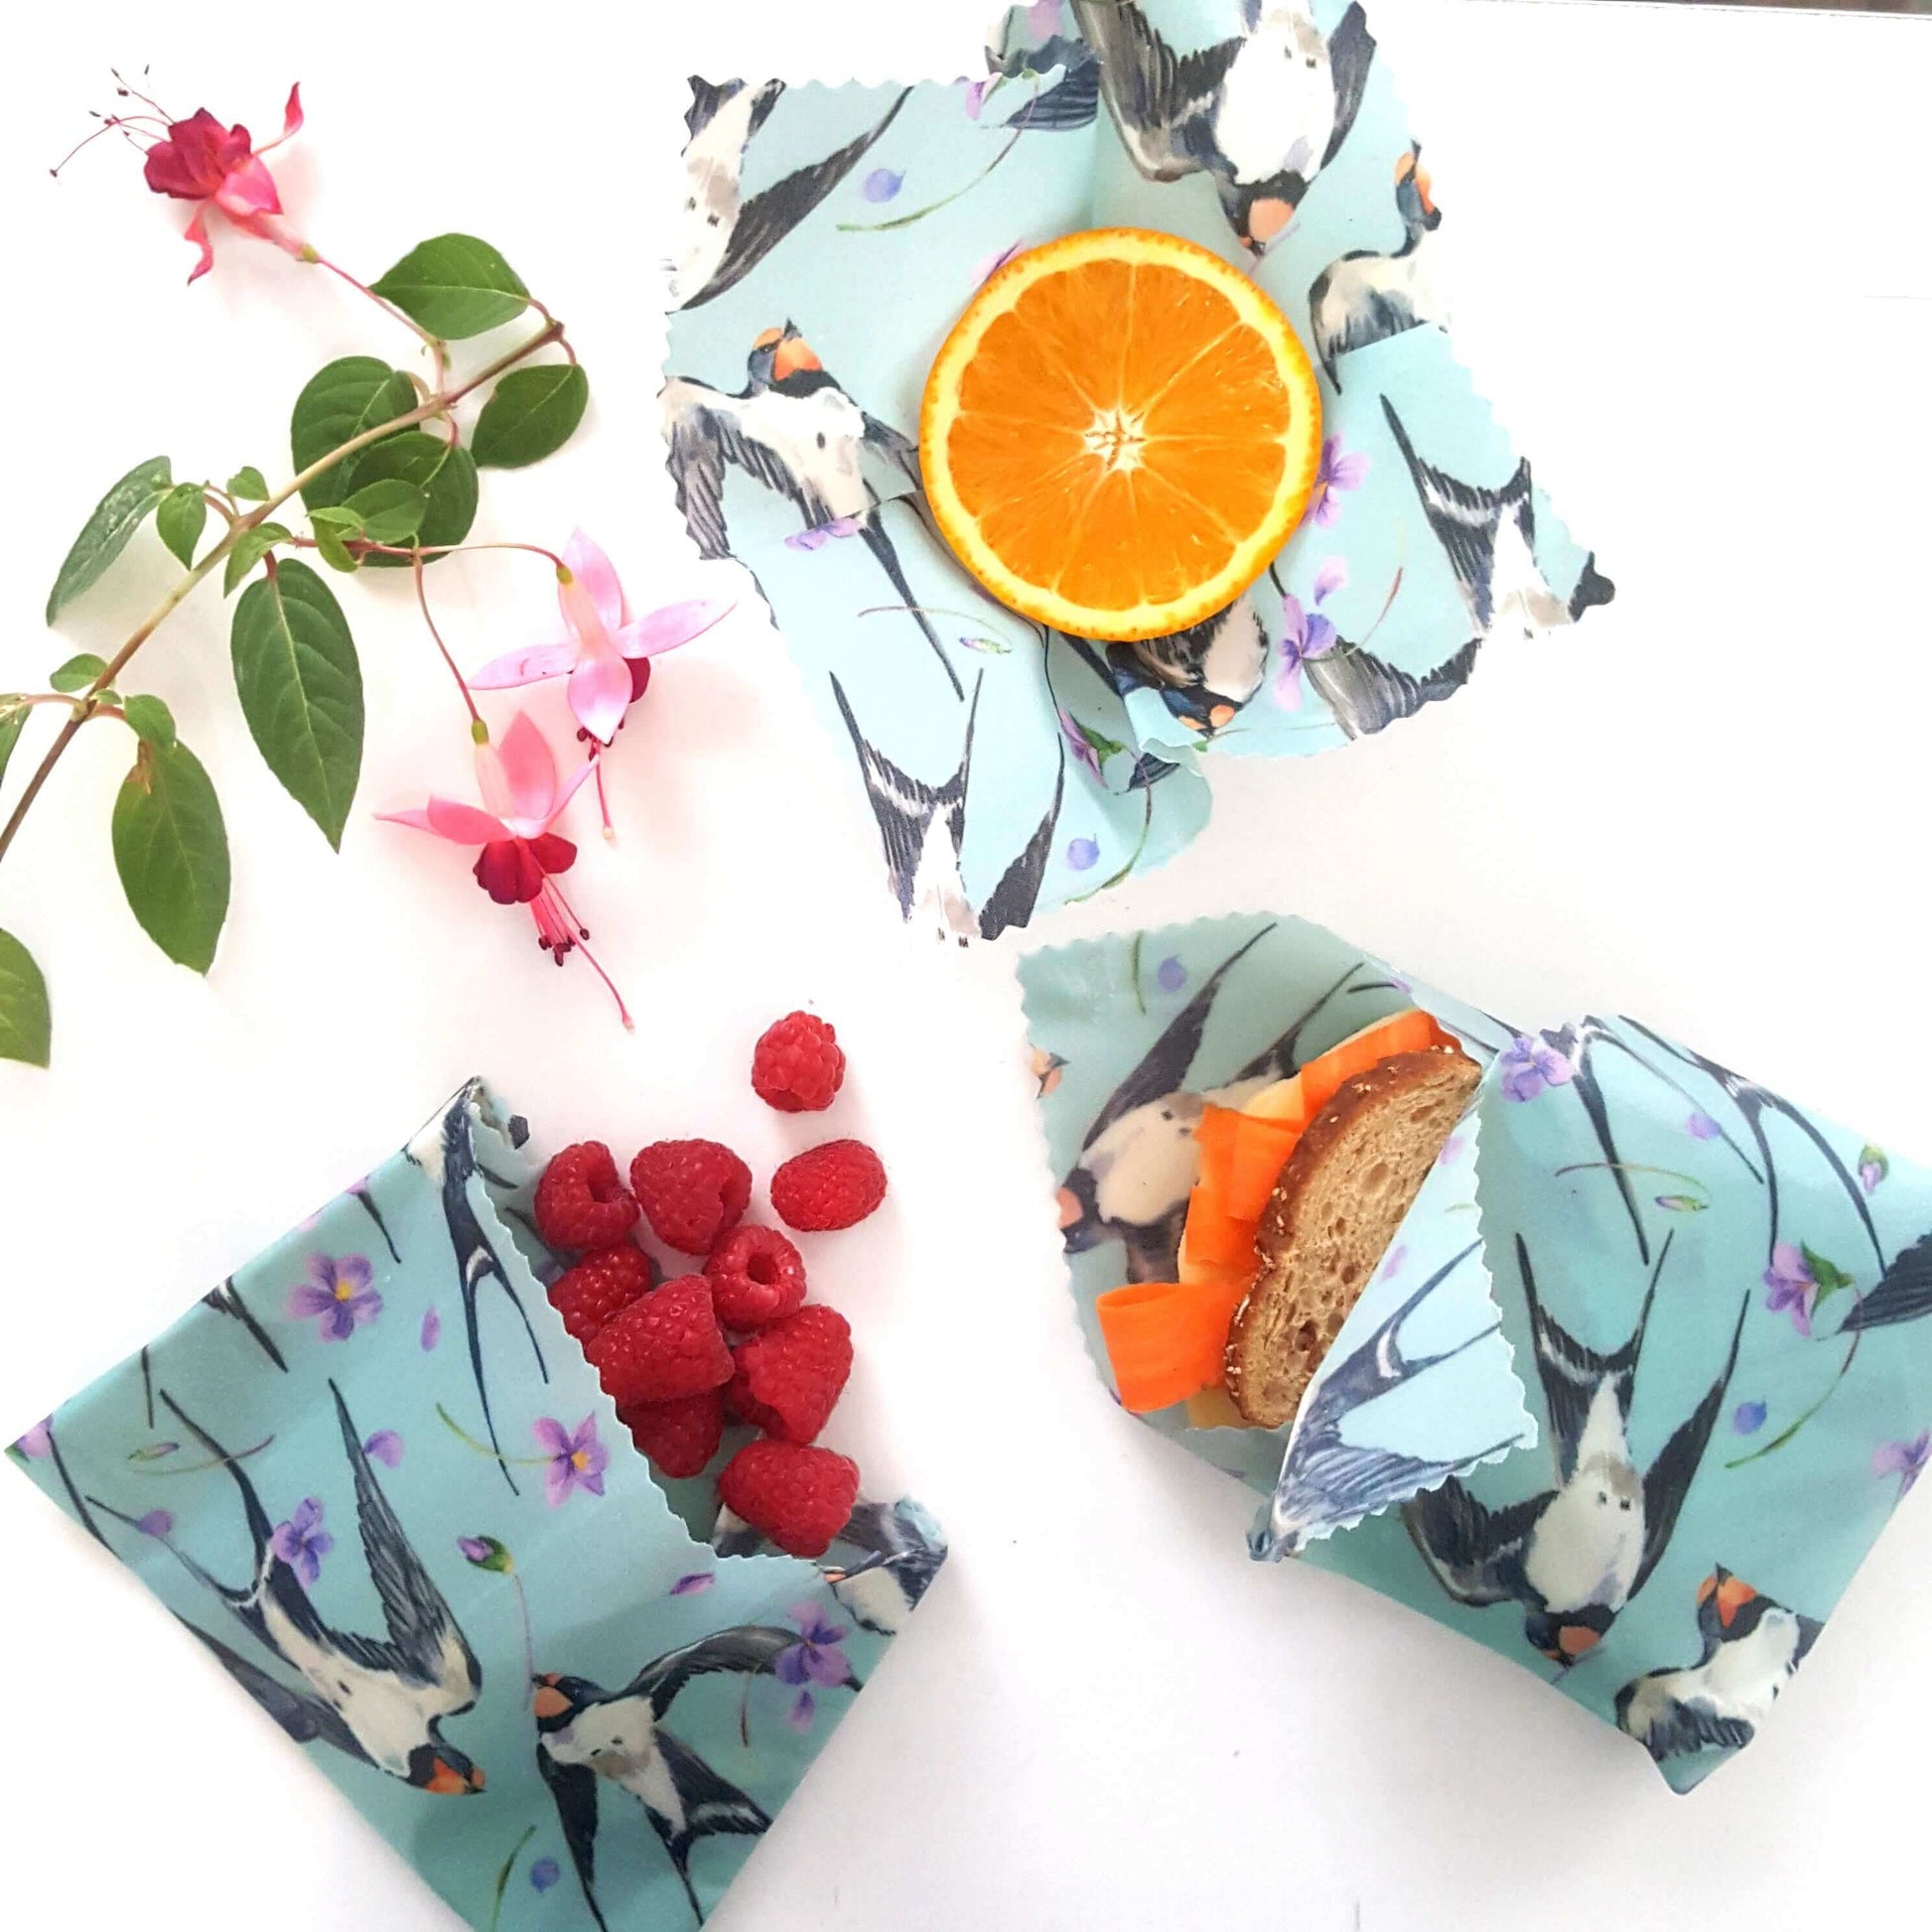 Reusable Beeswax Food Wraps 100% Hand Made in the UK by Honey Bee Good shown in Set of 3 Swifts pattern flatlay